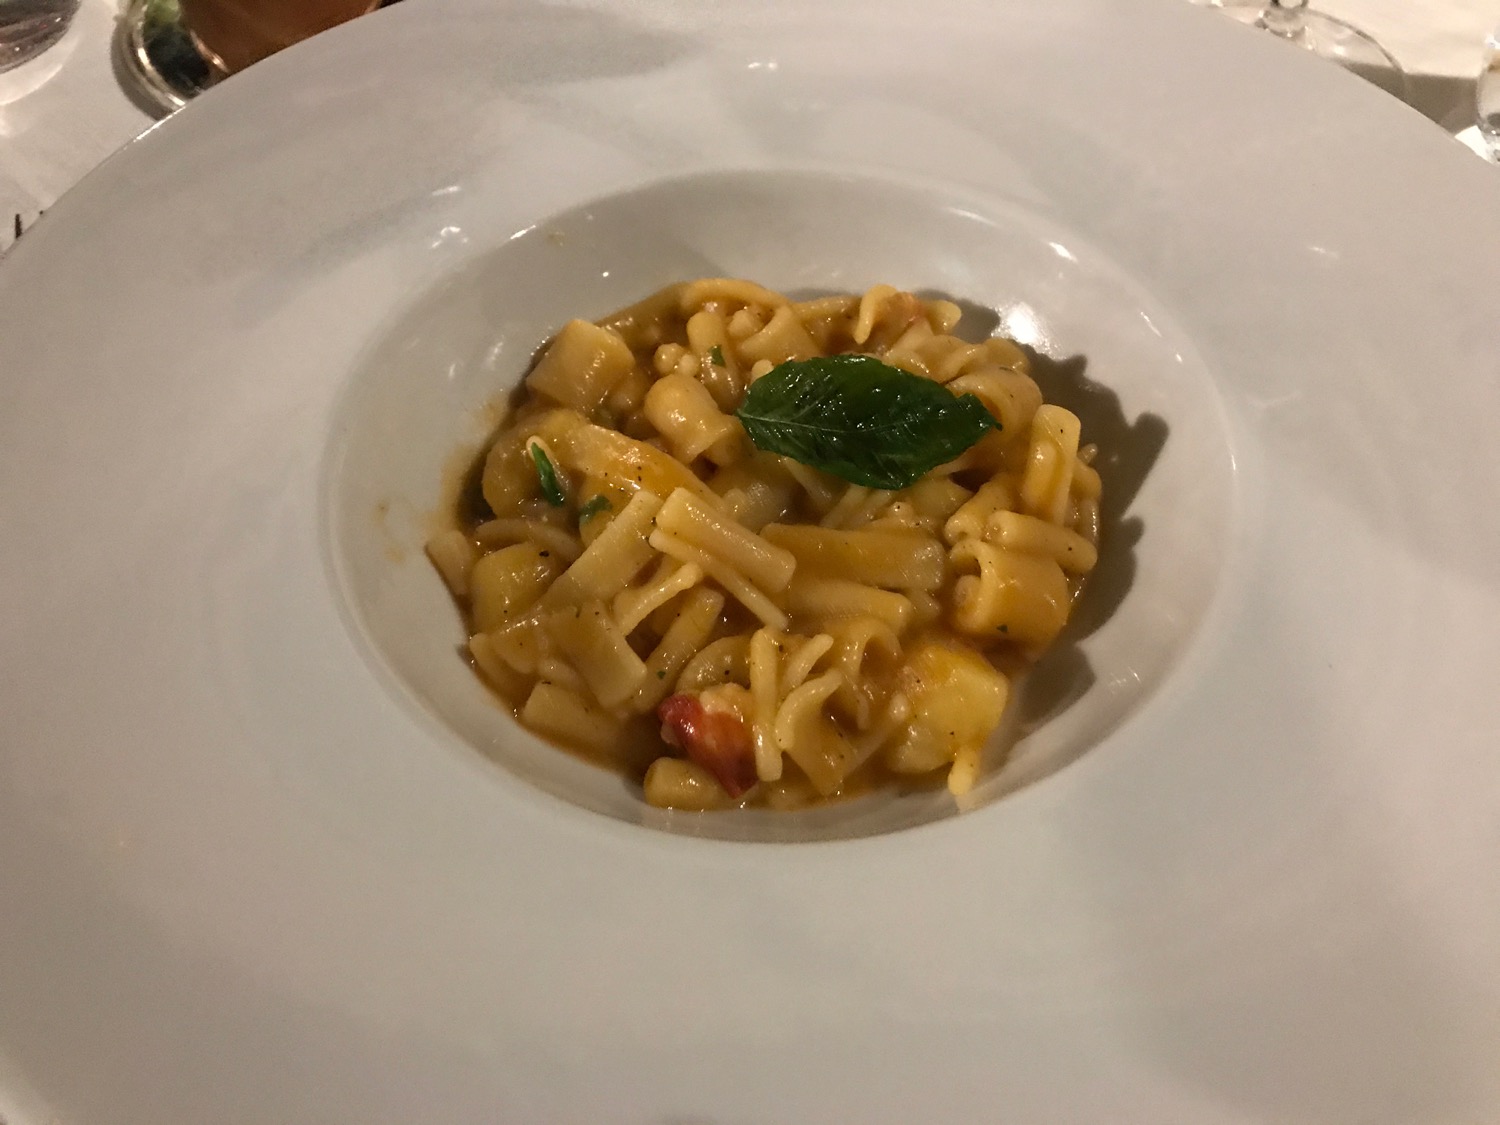 a plate of pasta with a leaf on top